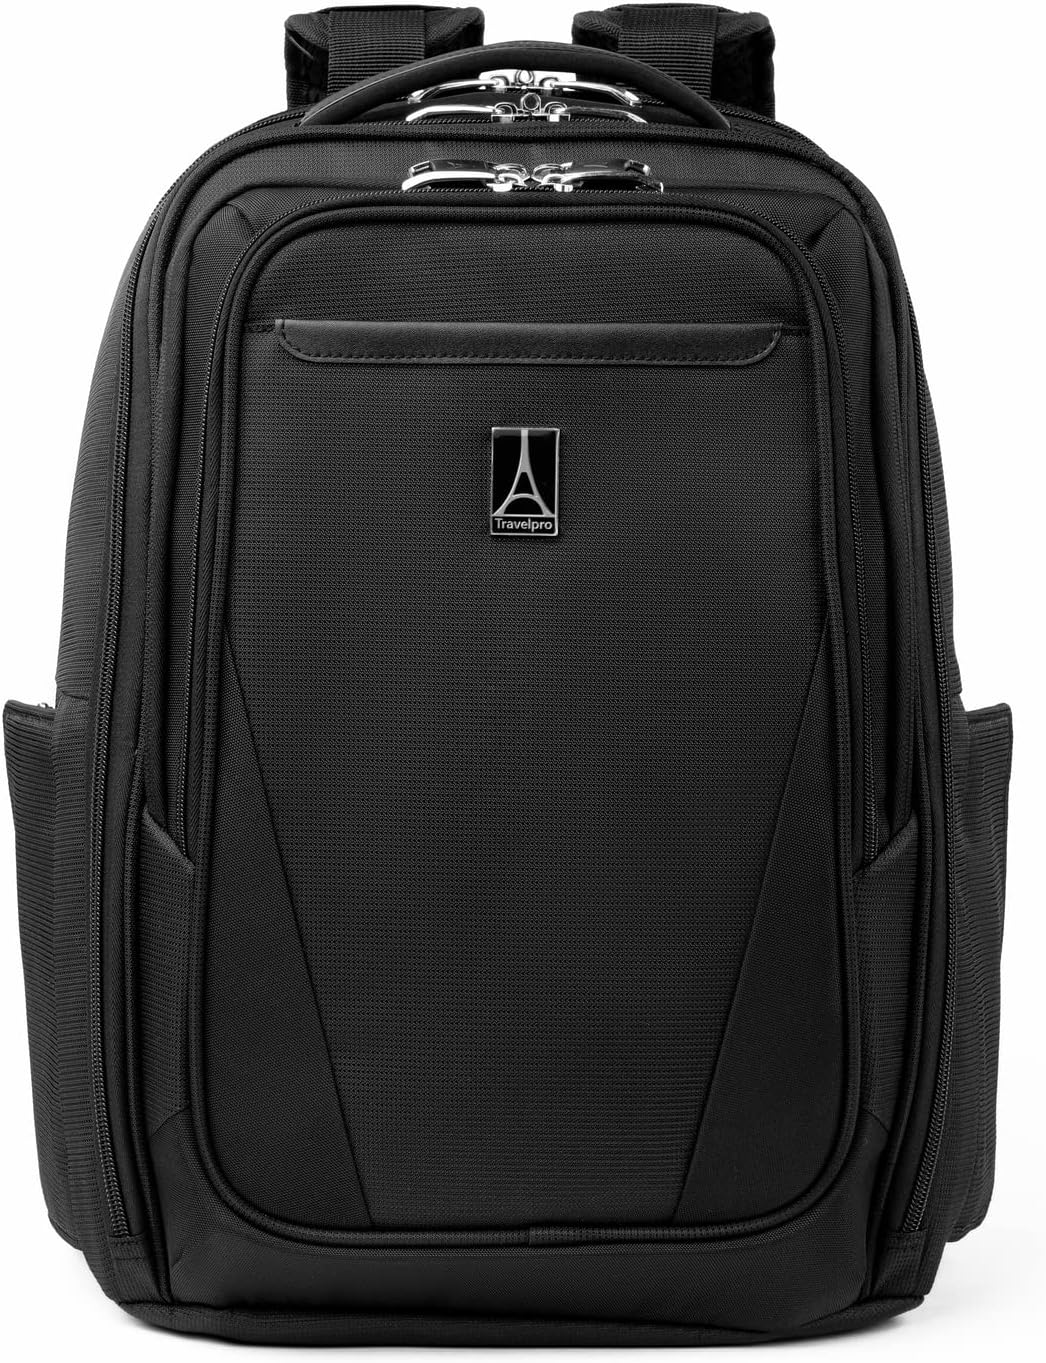 Travelpro Maxlite Lightweight Laptop Backpack, Fits up [...]